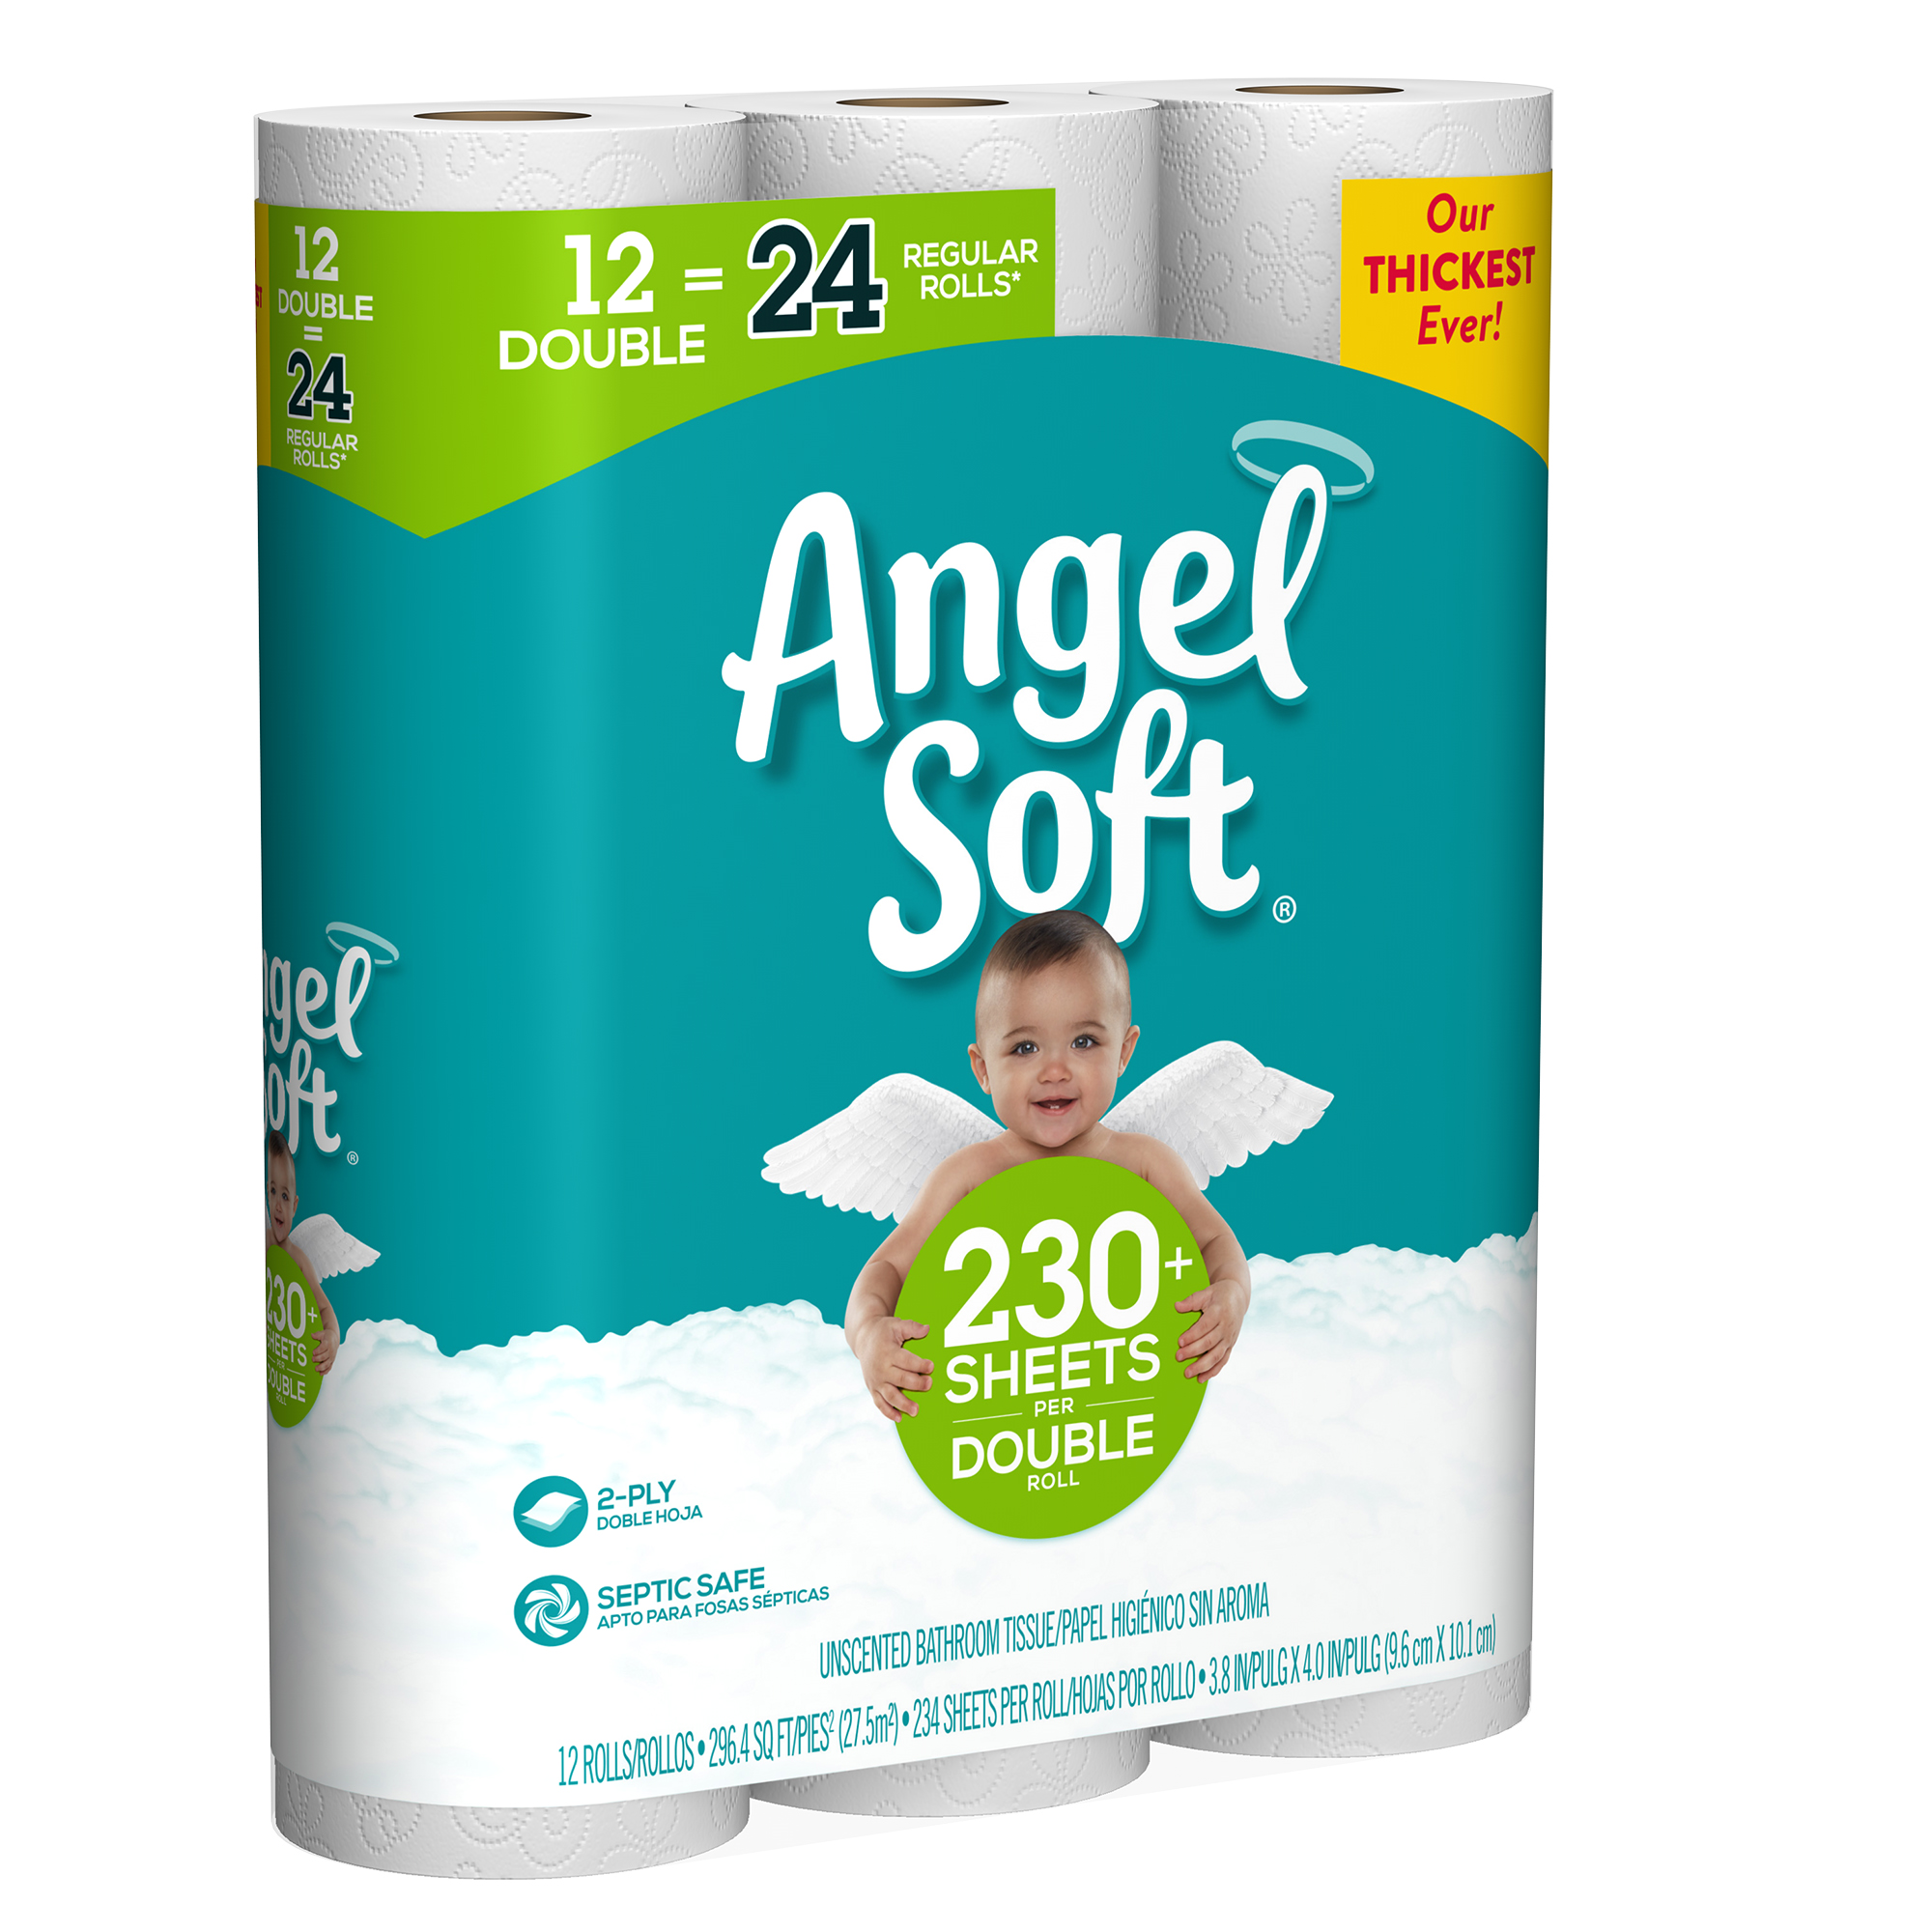 Angel Soft Toilet Paper, 12 Double Rolls - image 3 of 9